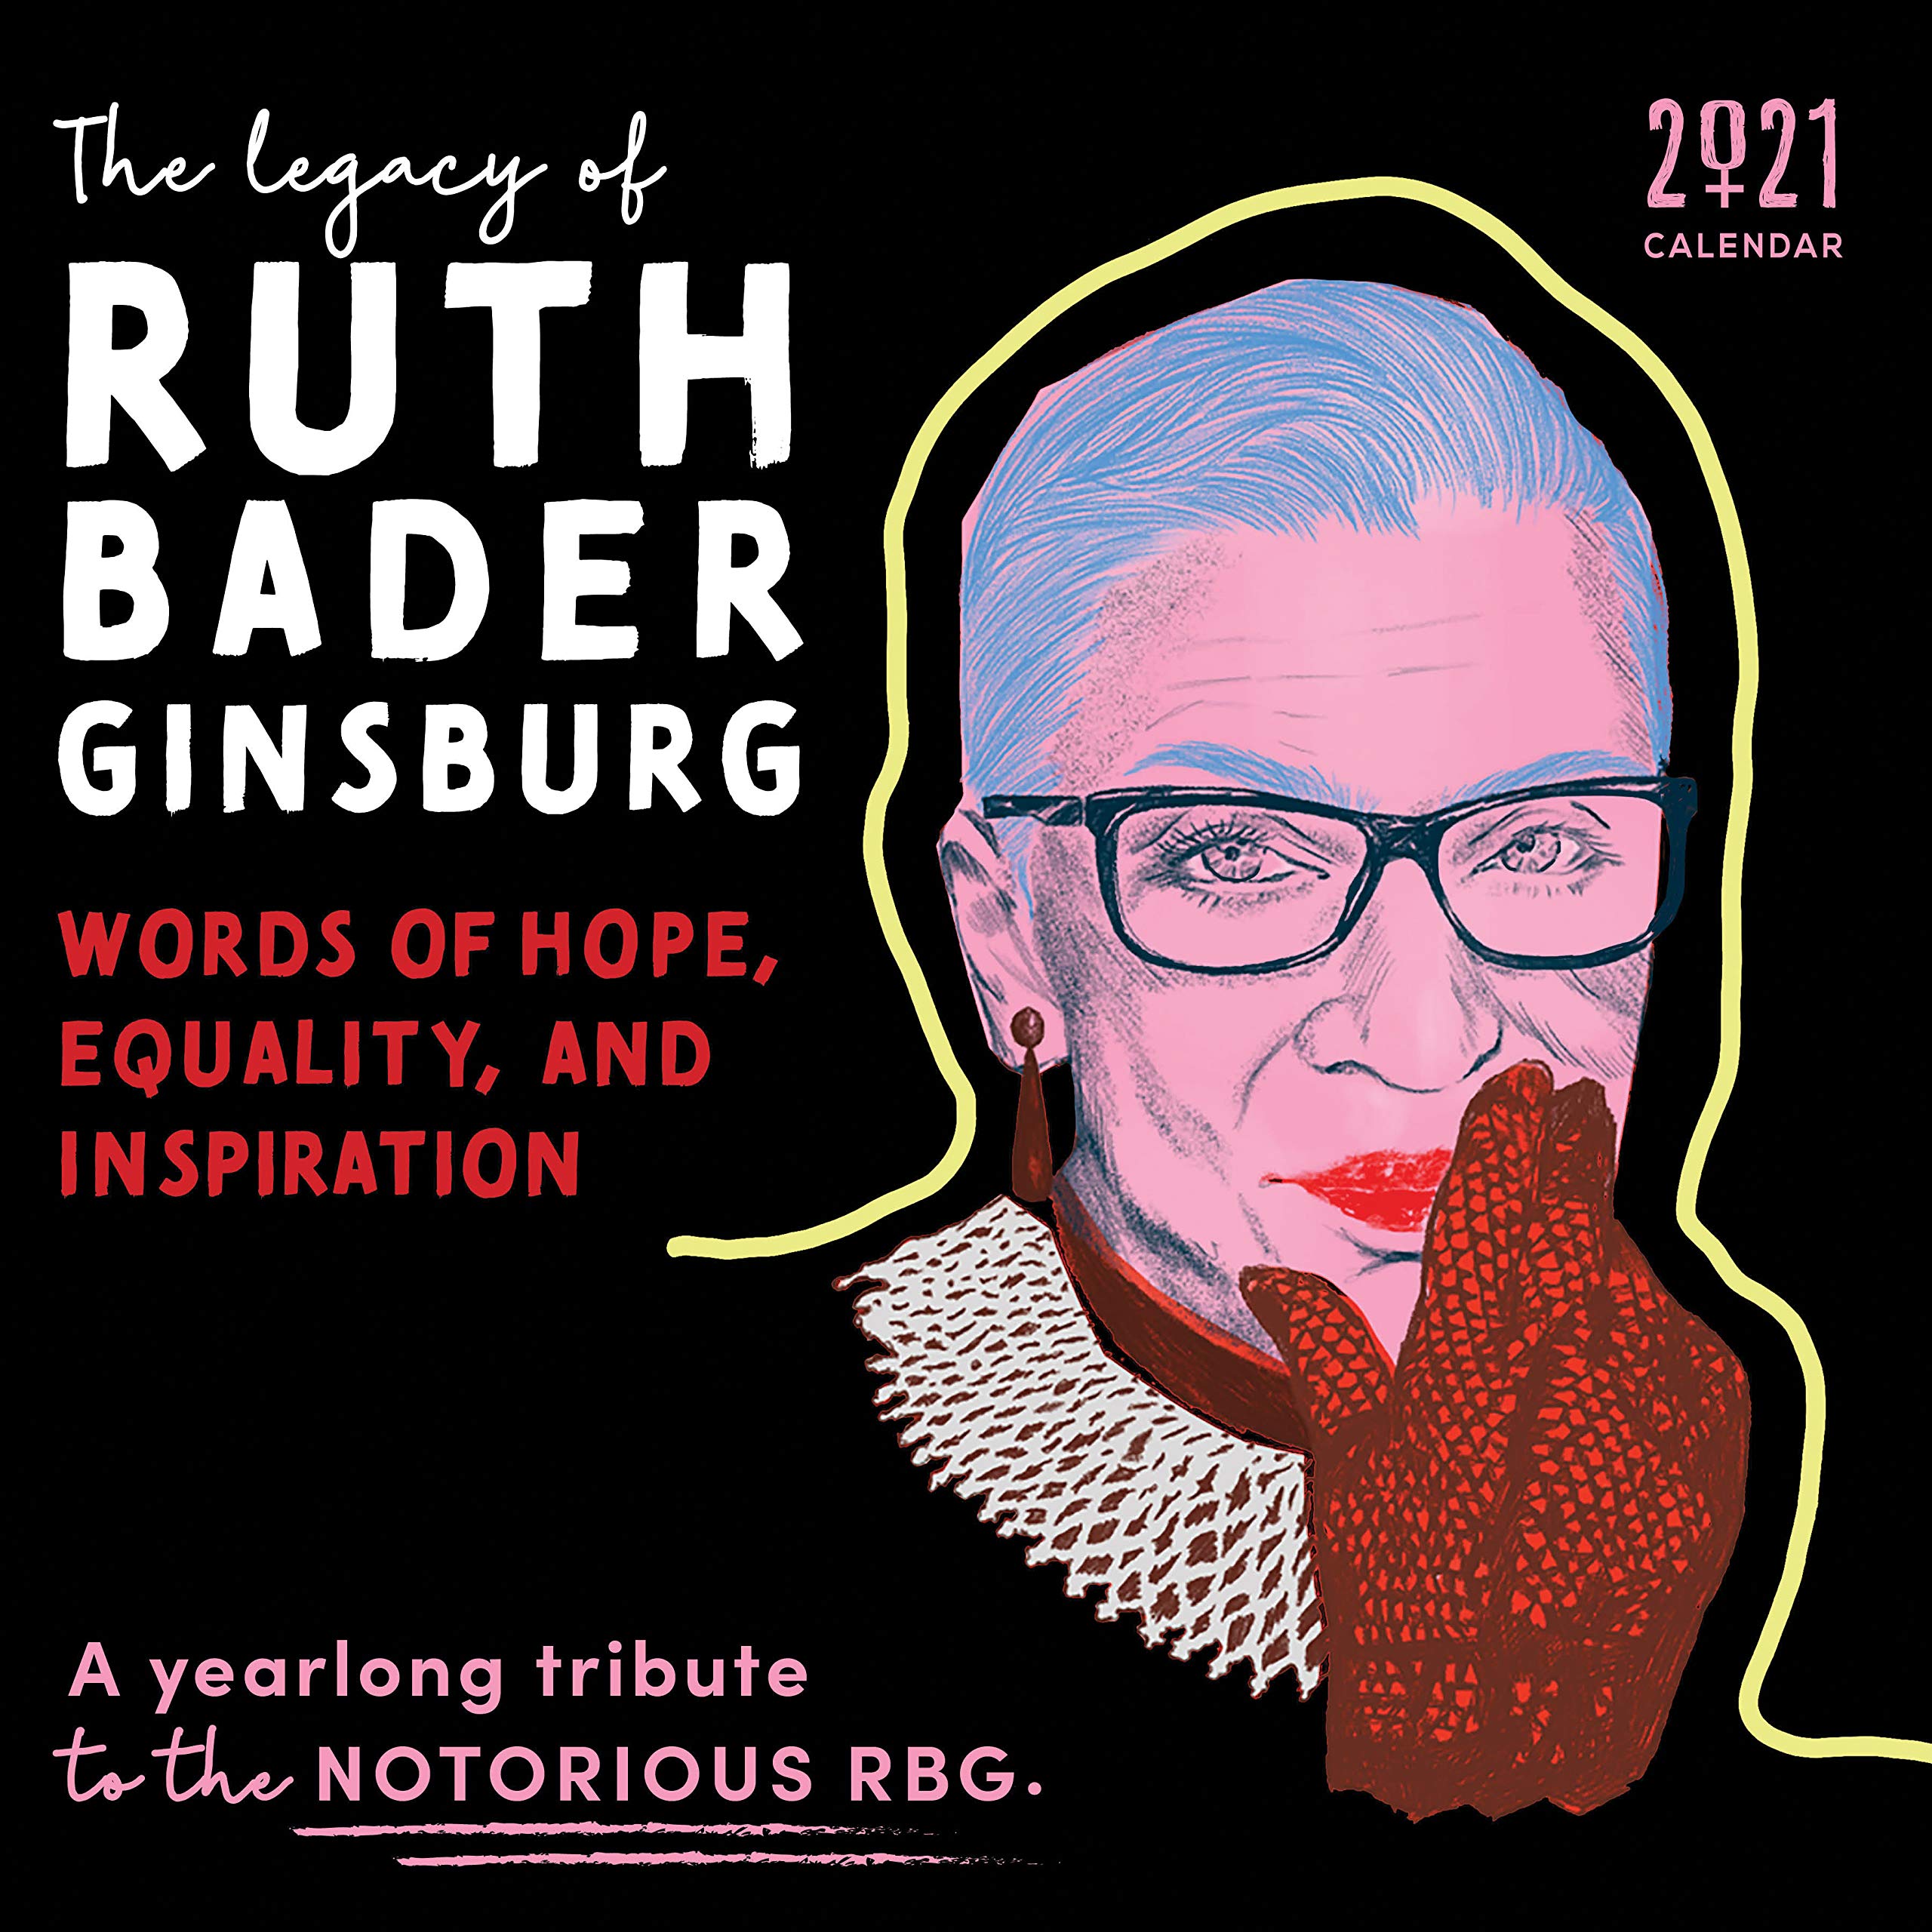 The Legacy Of Ruth Bader Ginsburg Wall Calendar Her Words Of Hope Equality And Inspiration A